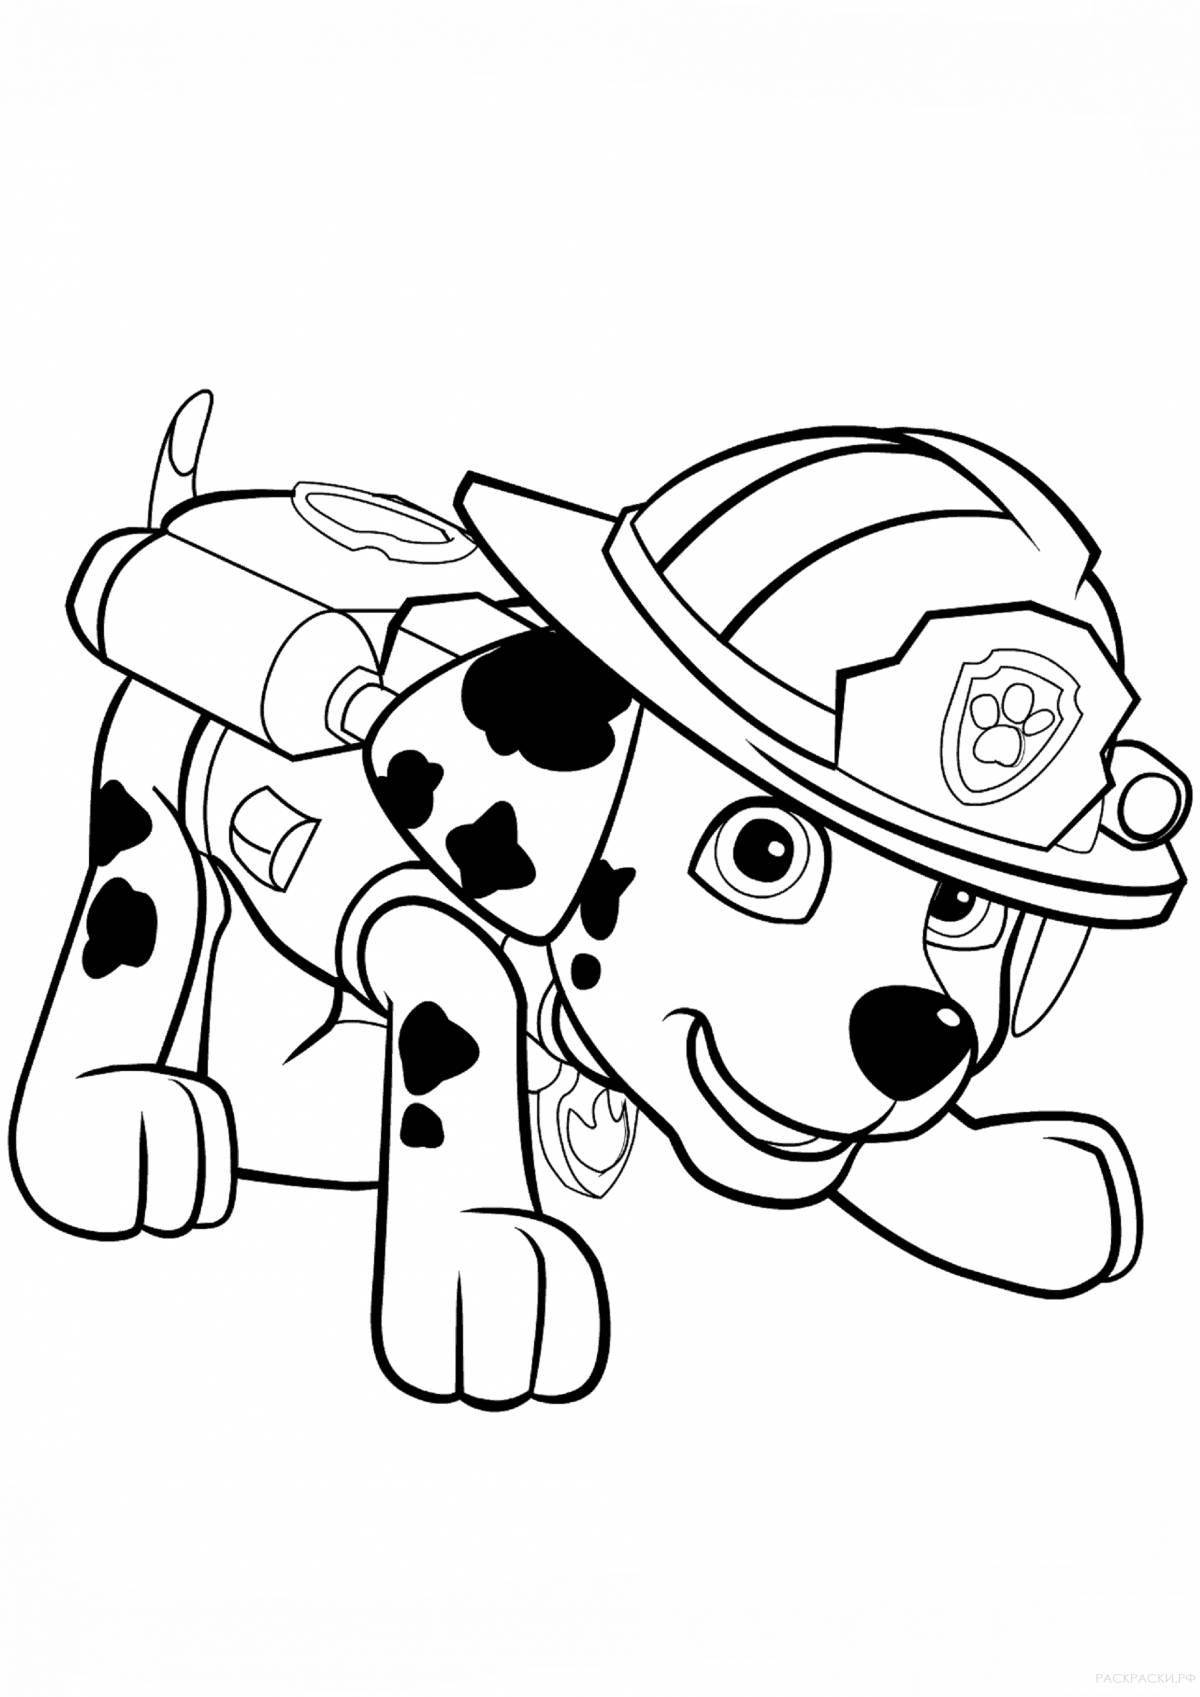 Funny marshal coloring book for kids